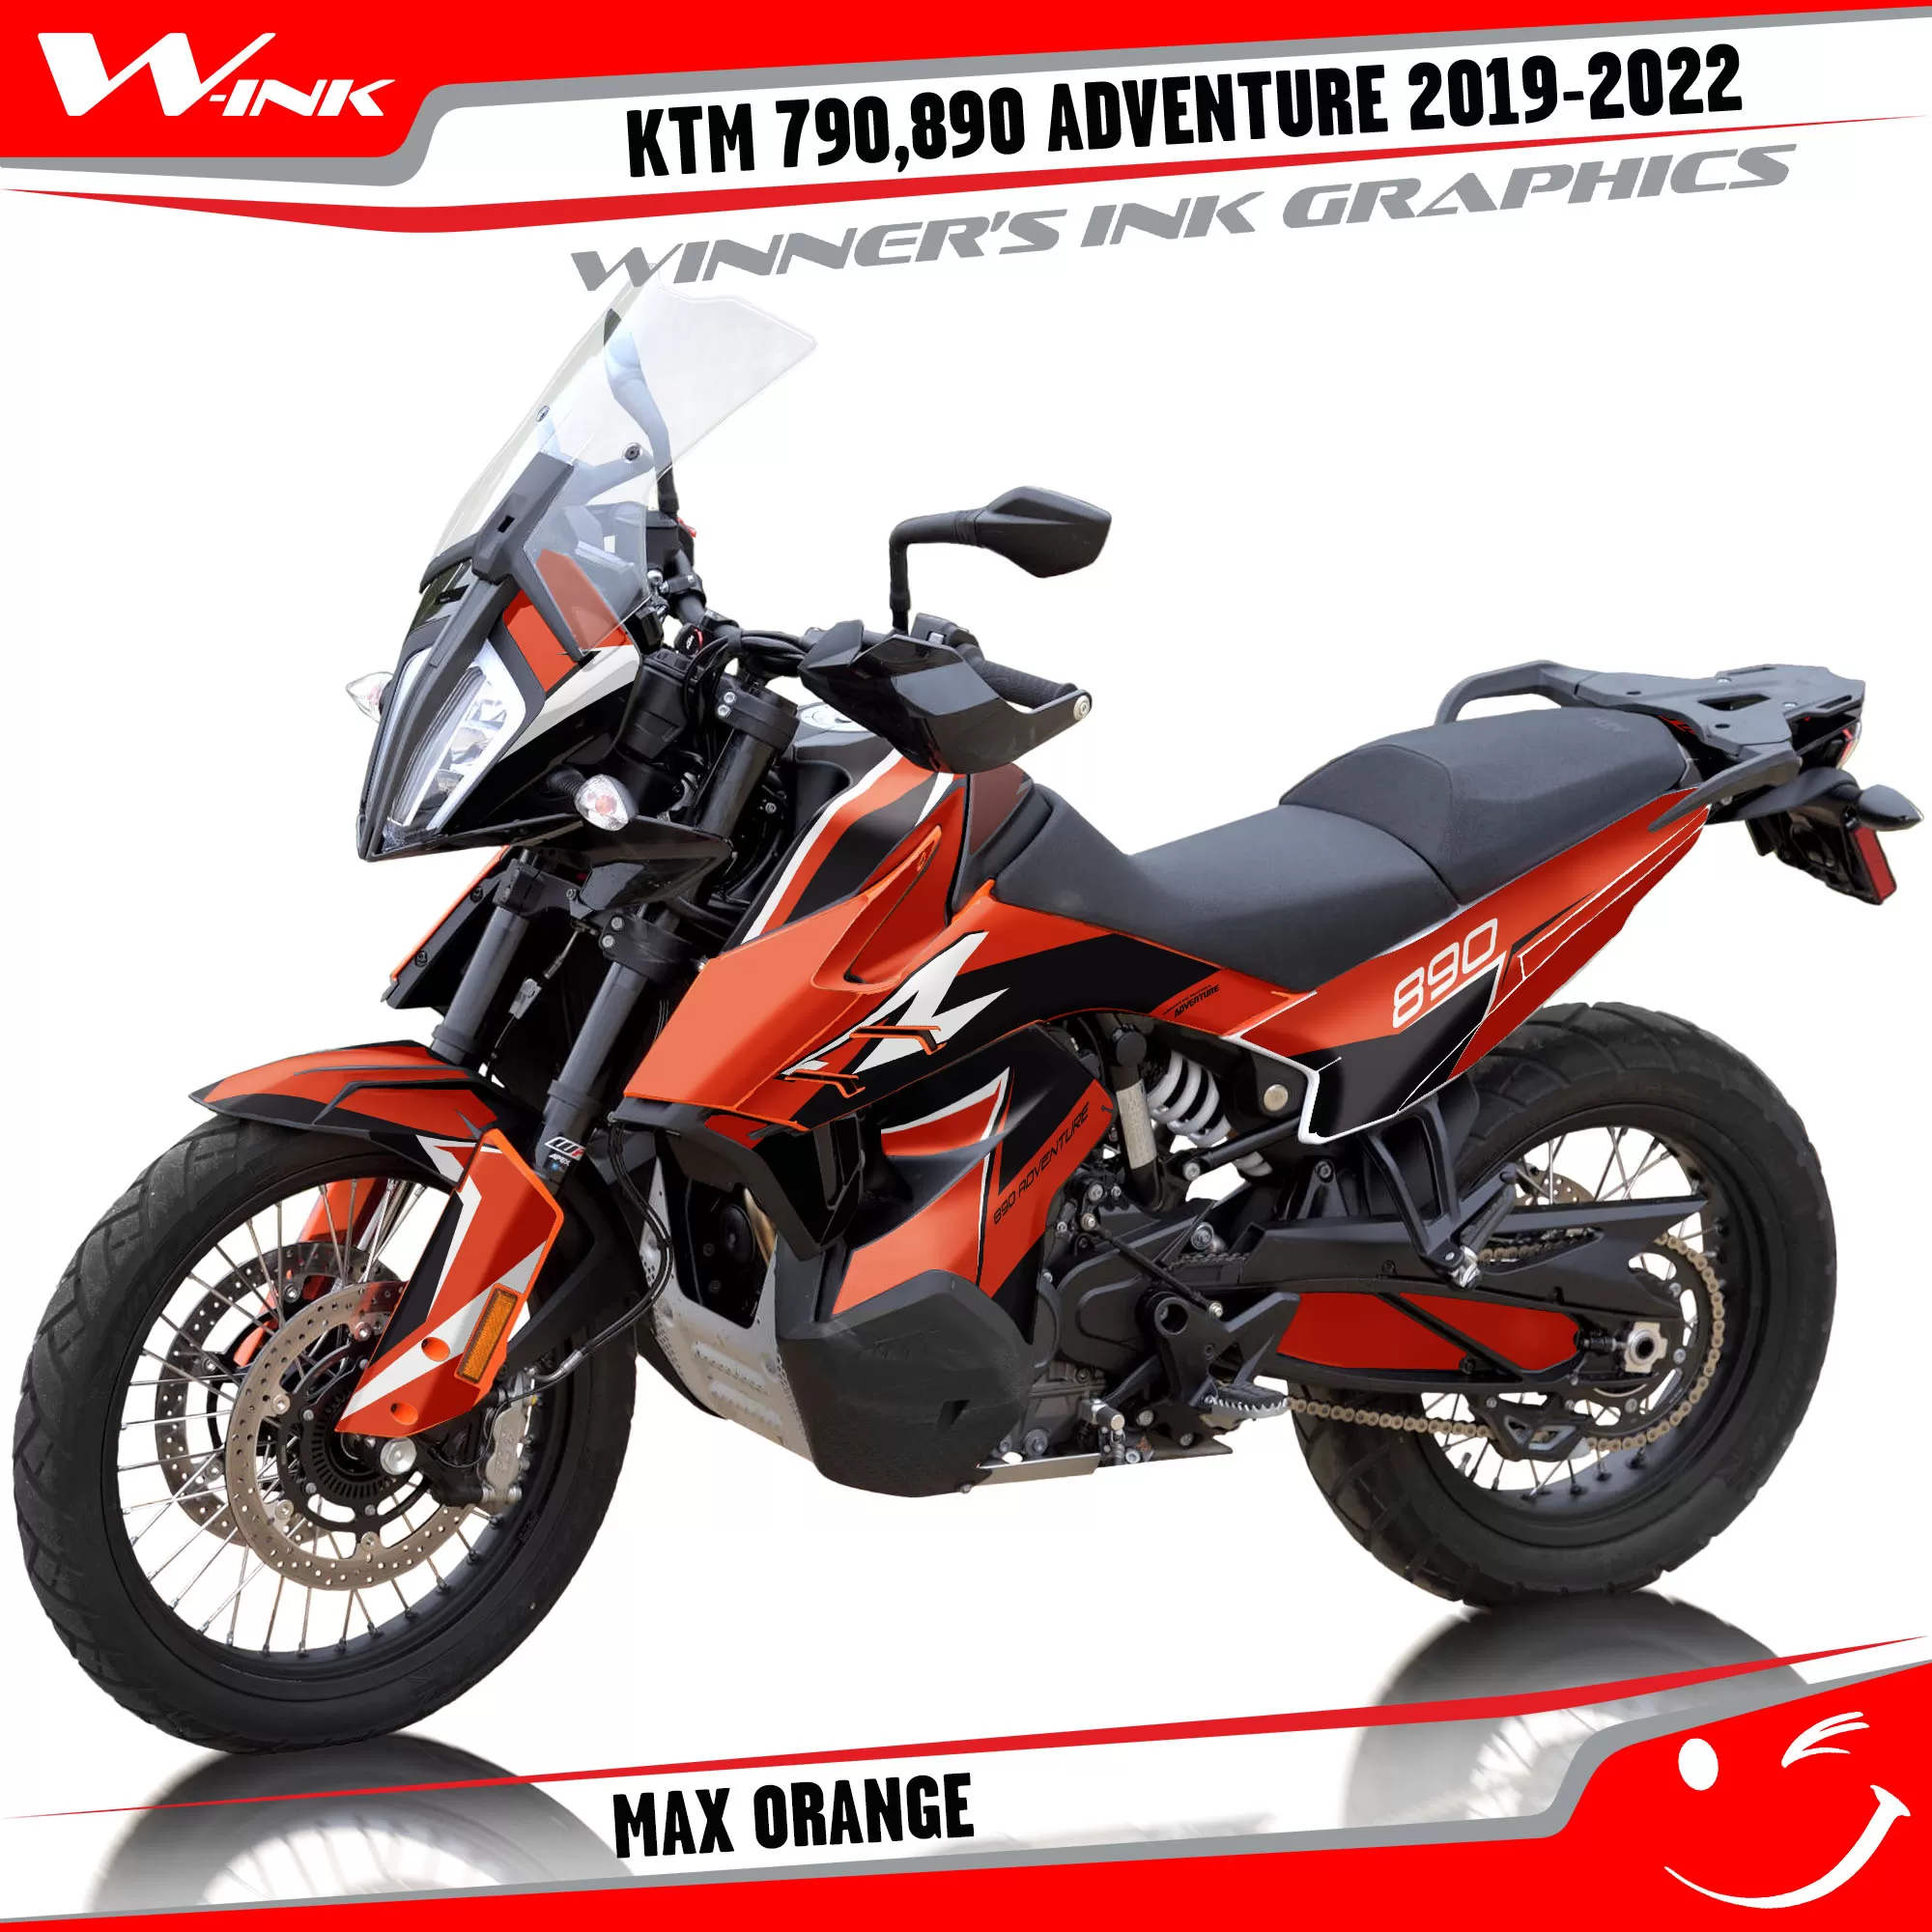 Adventure-790-890-2019-2020-2021-2022-graphics-kit-and-decals-with-designs-Max-Orange